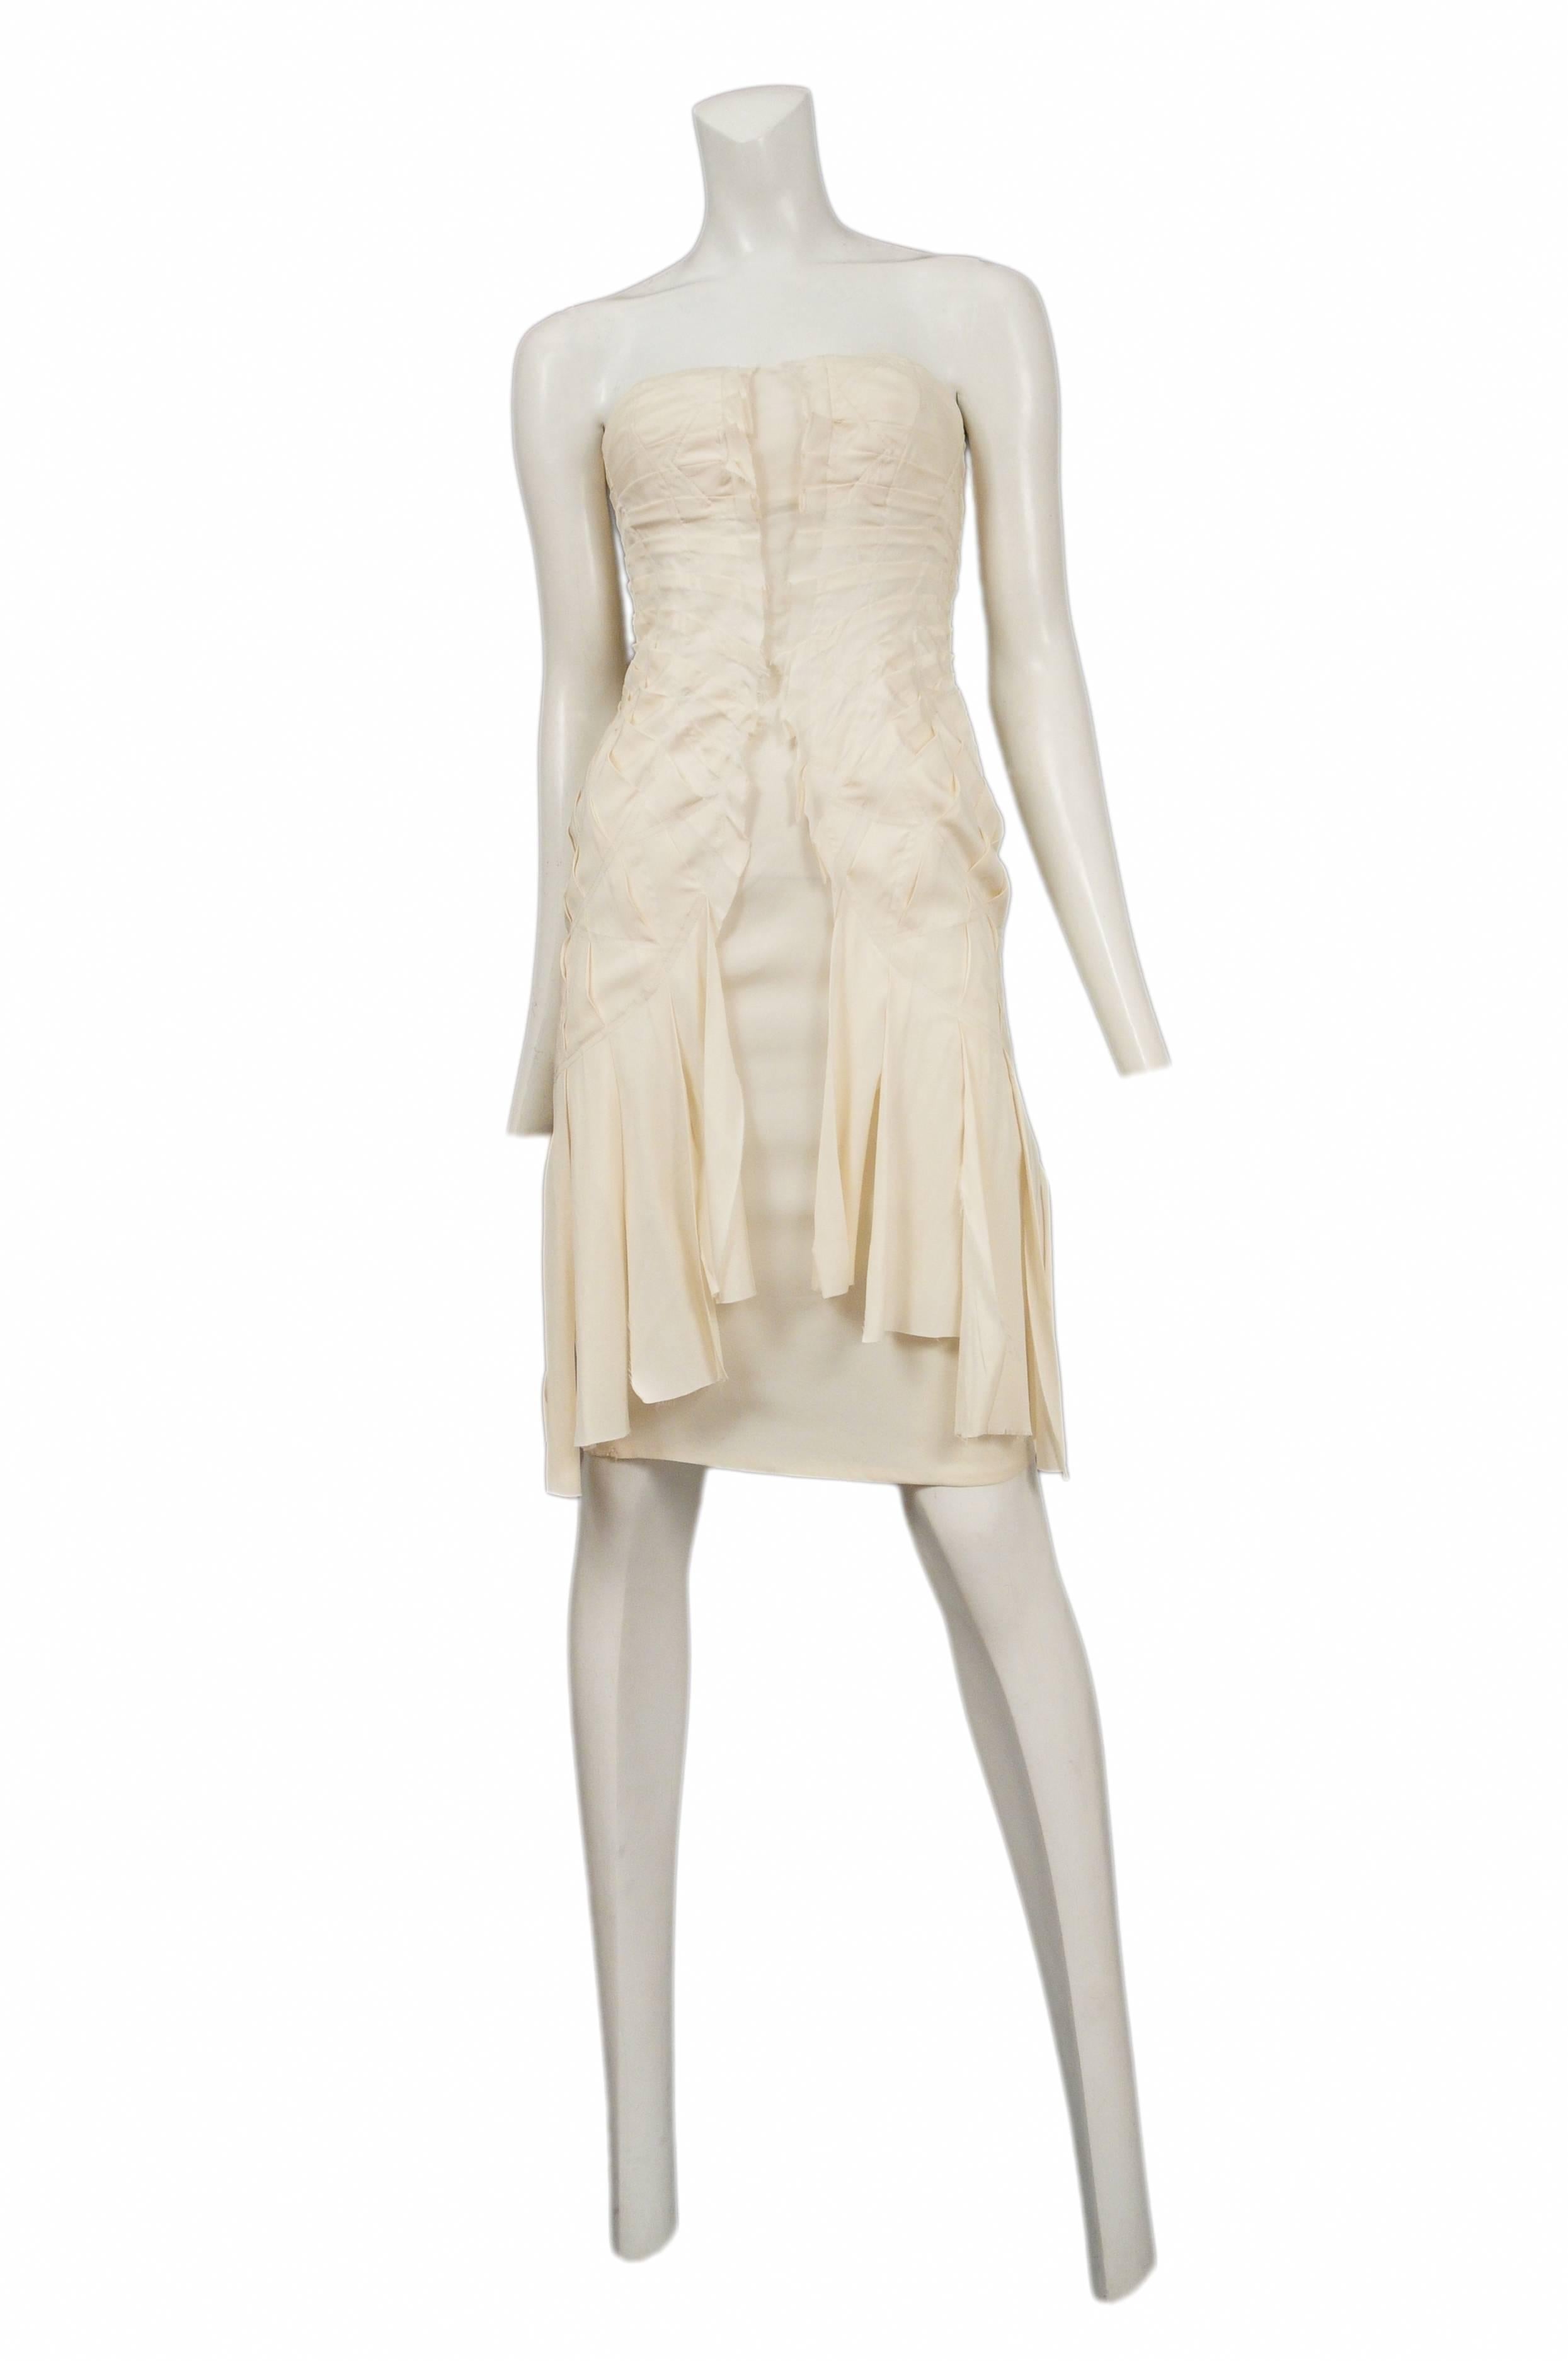 Tom Ford for Gucci cream silk strapless dress with structured pleating and unfinished hem detail. Circa 2004

